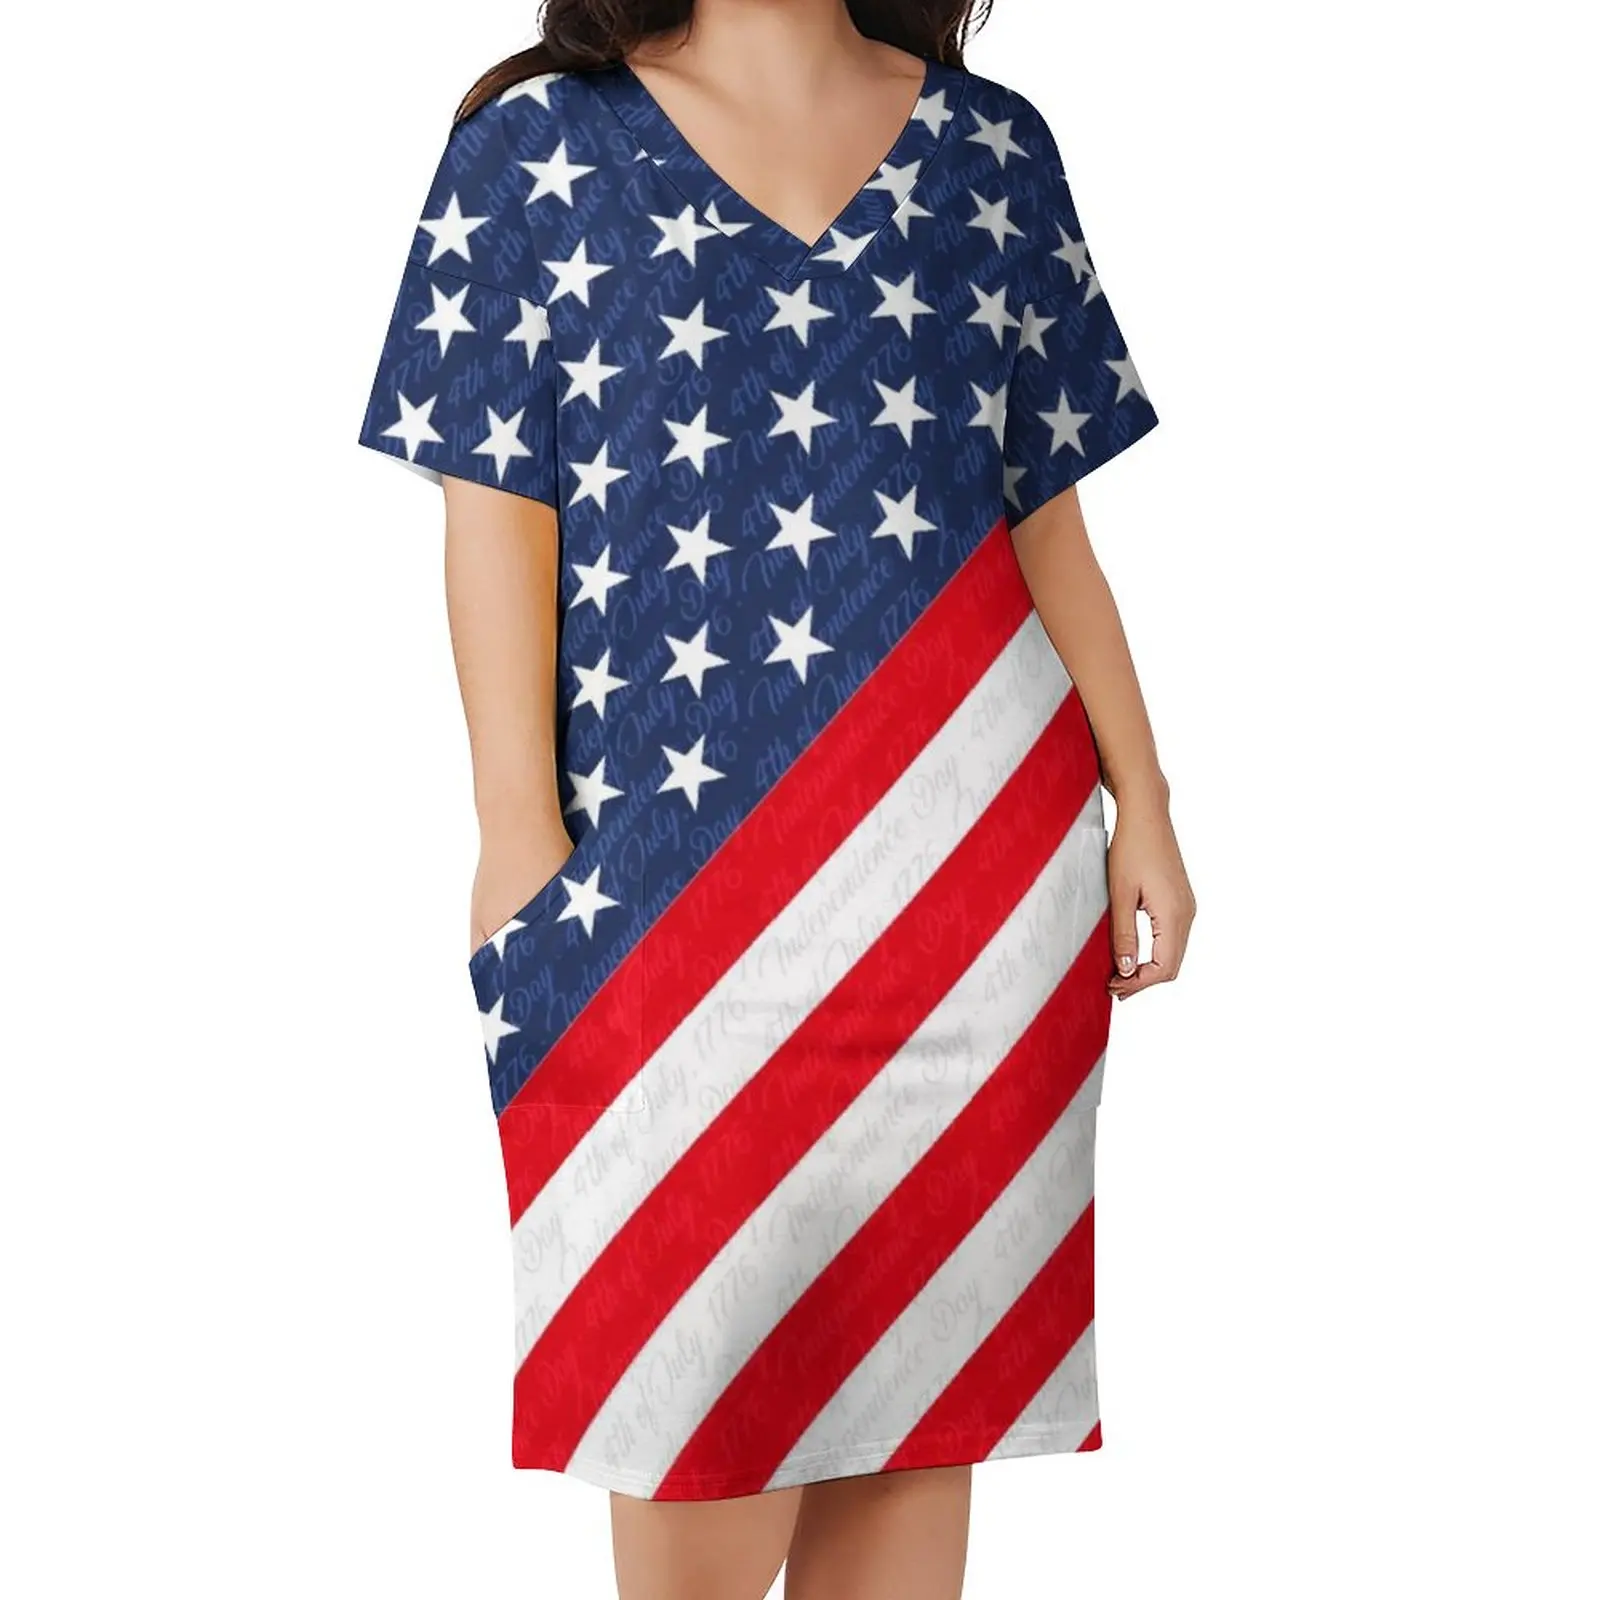 

Star Flag Pirnt Dress Short Sleeve USA 4th of July Independence Day Street Fashion Dresses Summer Casual Dress Women Plus Size